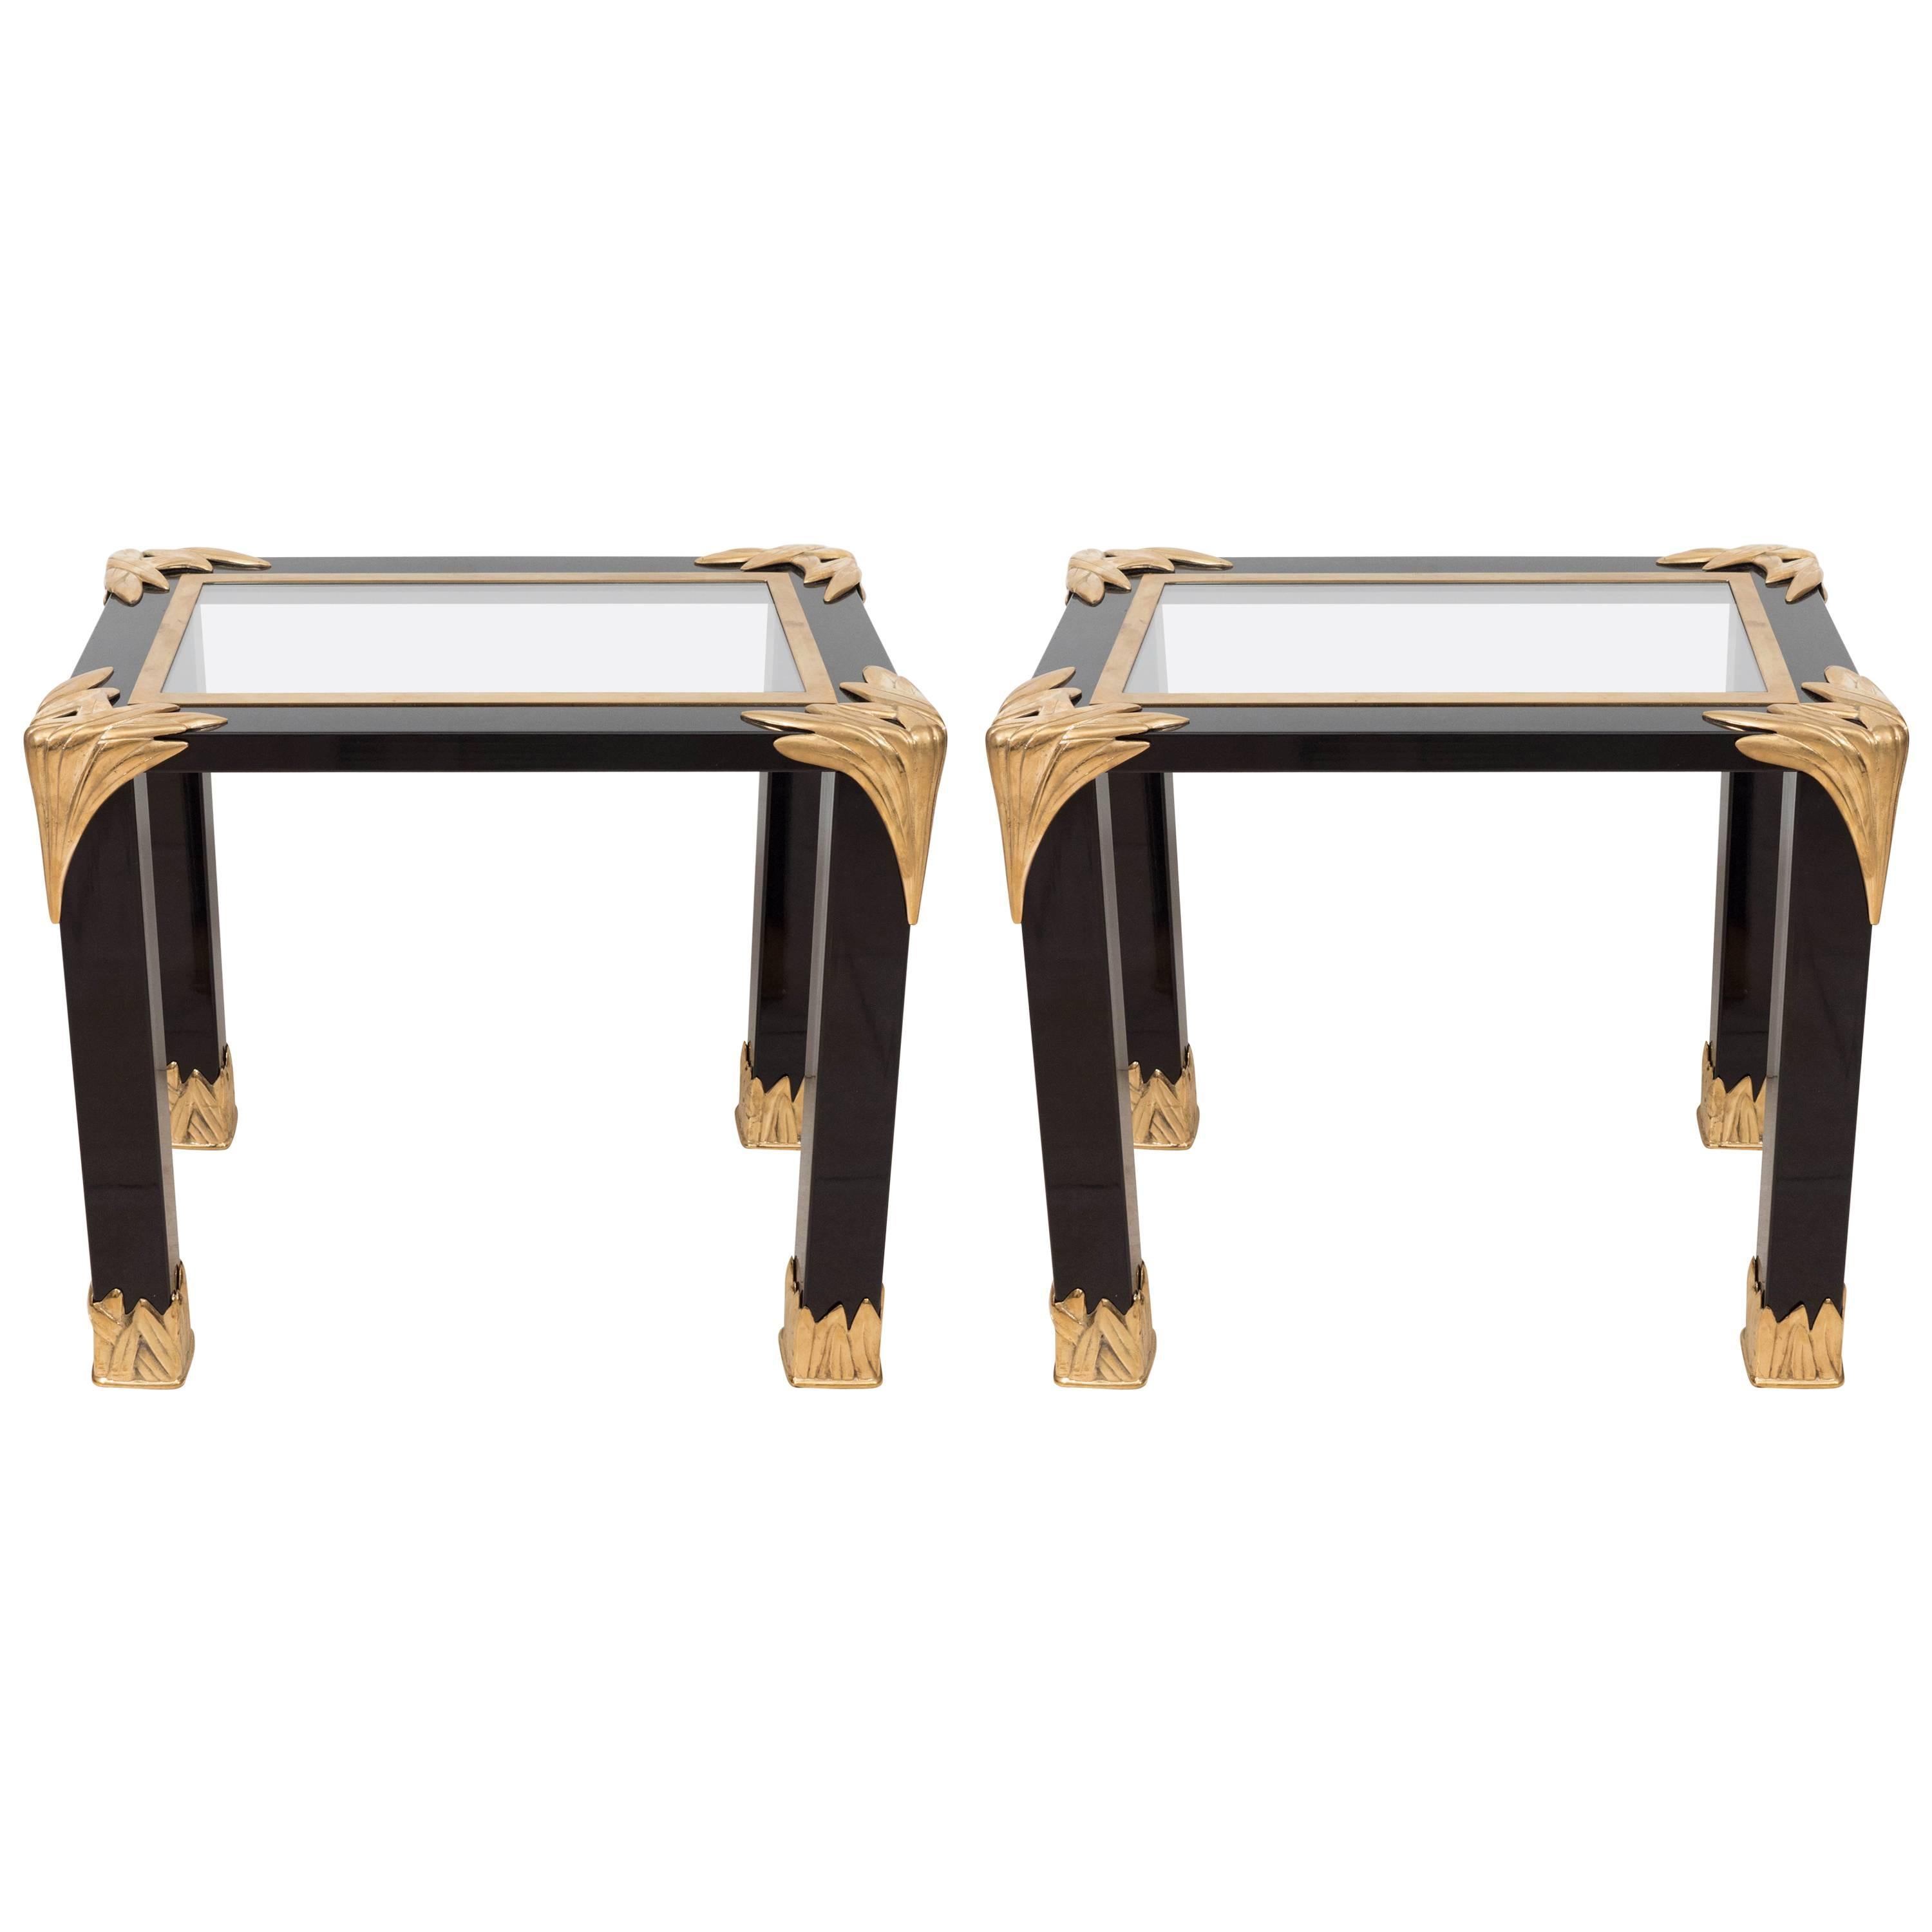 Pair of Black Lacquered Wood and Glass Side Tables